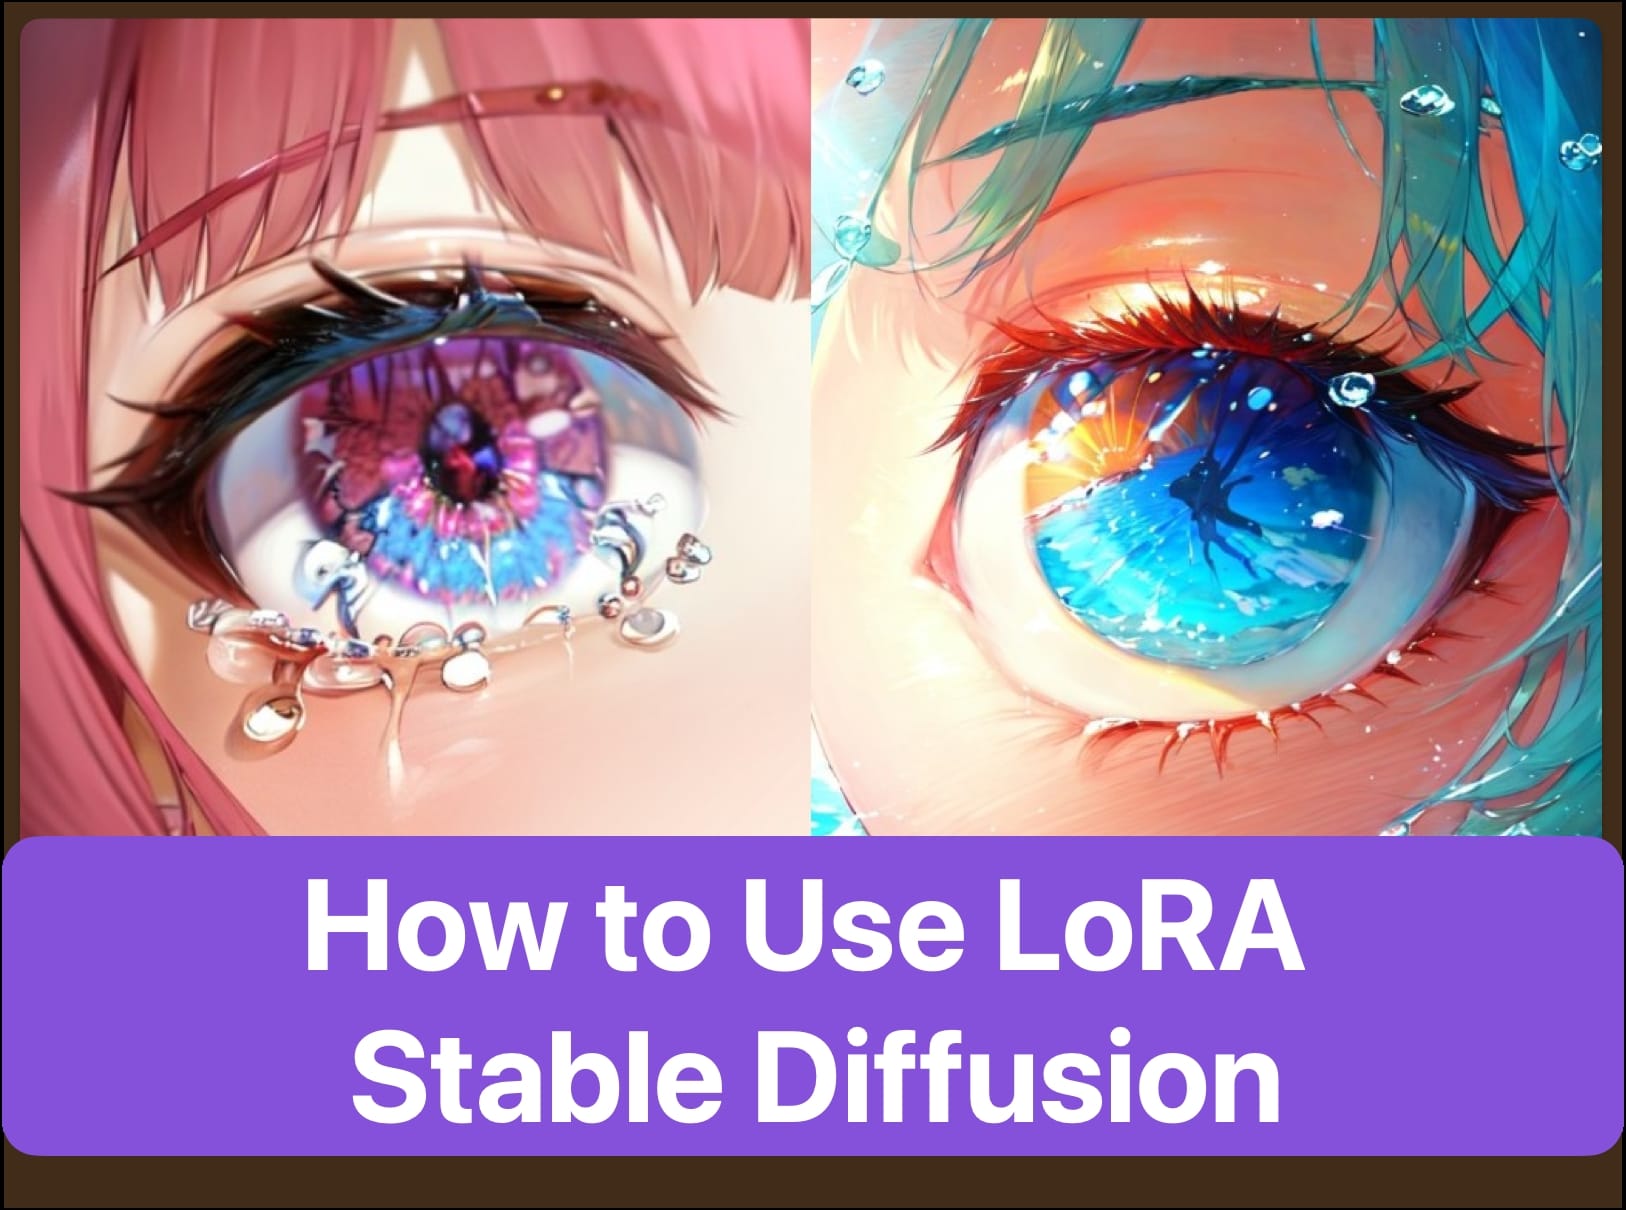 How to Use LoRA for Stable Diffusion